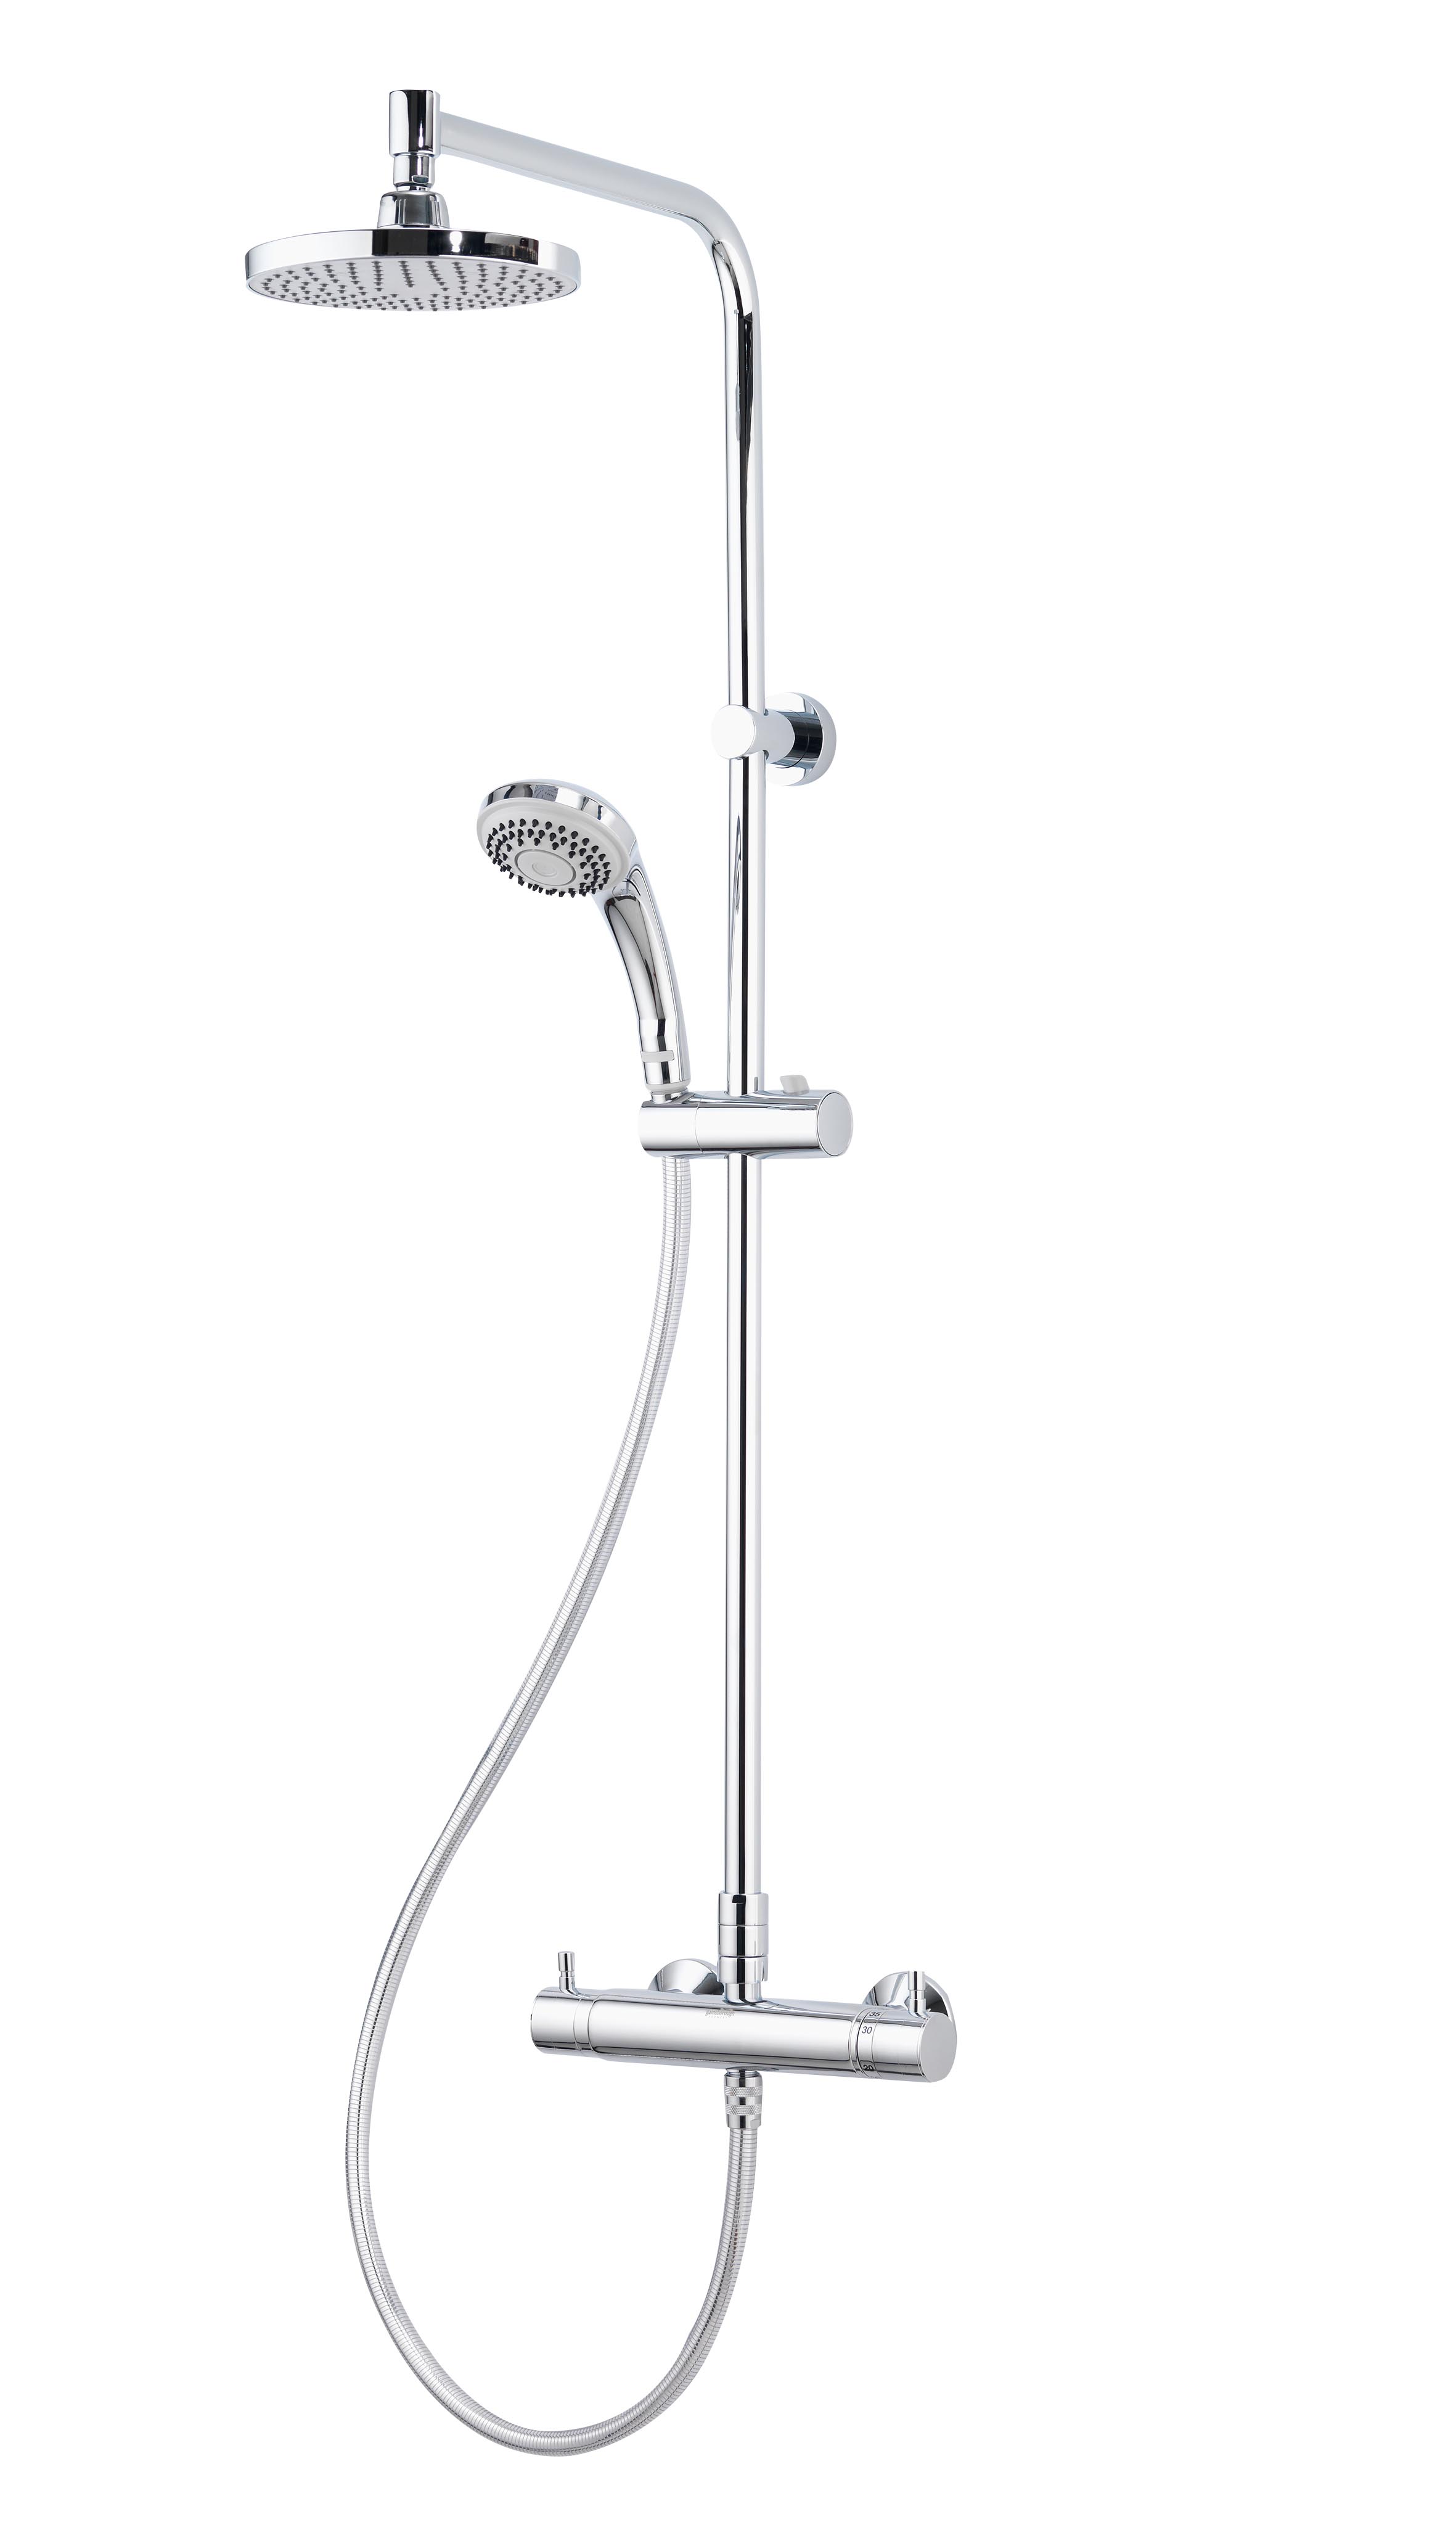 GT450 Dual Head Bar Shower - reduced by 20% to £159.99